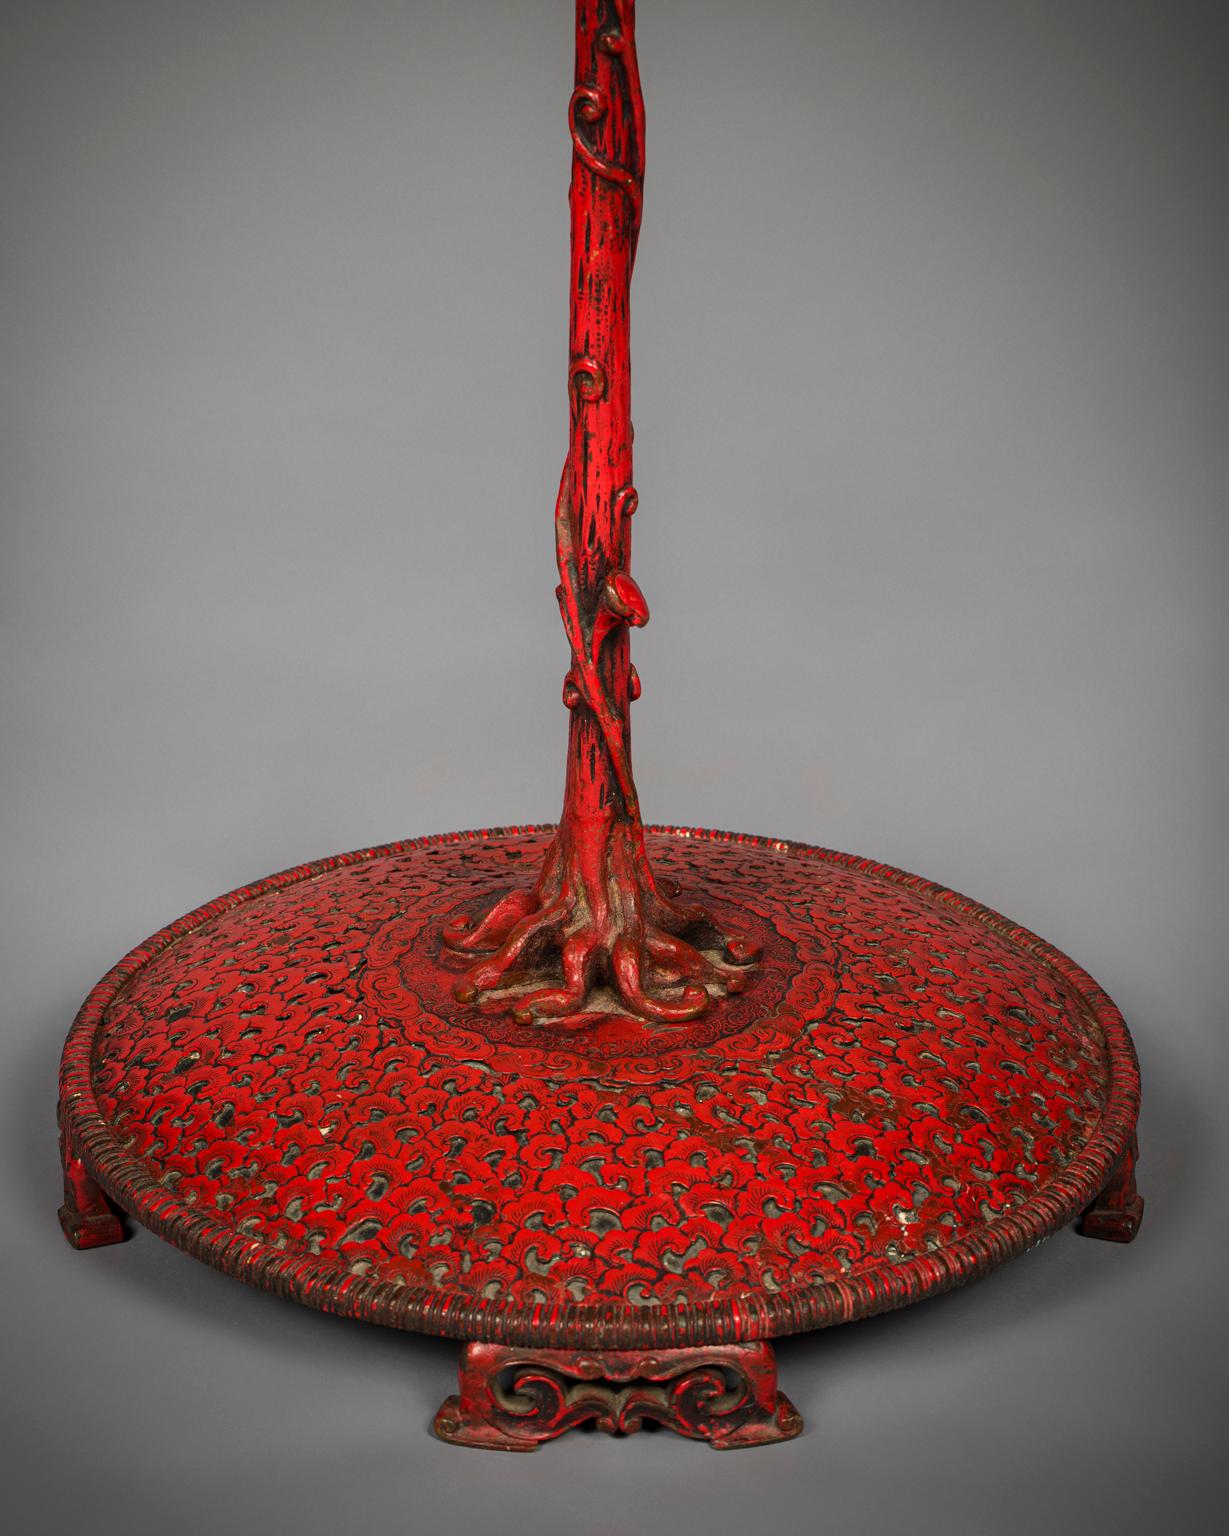 Early 20th Century American Red Lacquered Bronze Floor Lamp, by E.F. Caldwell, circa 1910 For Sale